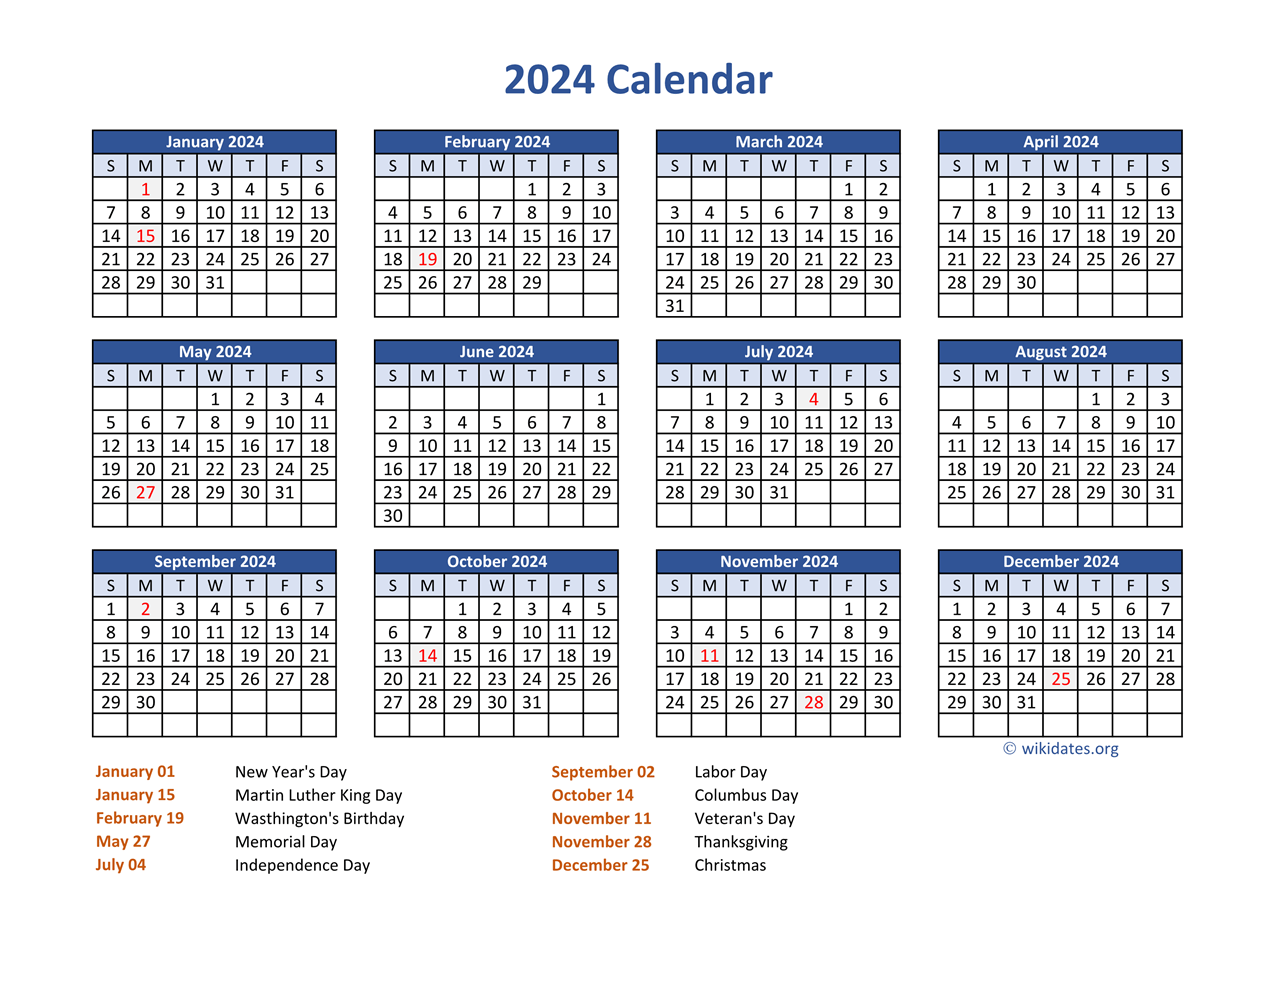 Pdf Calendar 2024 With Federal Holidays | Wikidates for Free Printable 2024 Calendar With Us Holidays